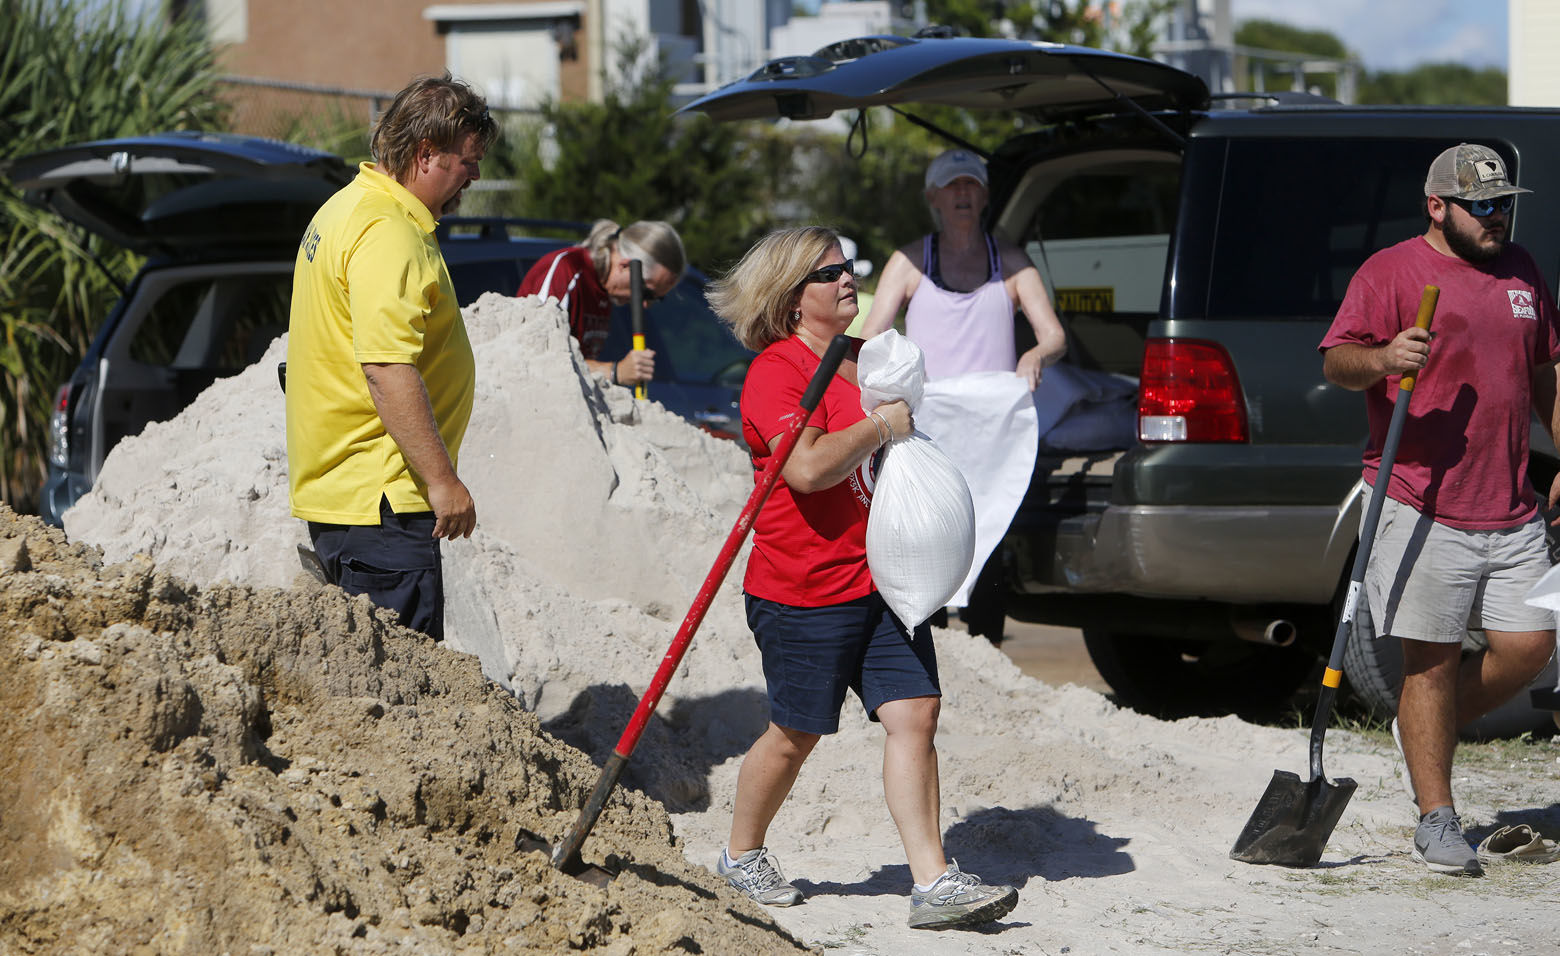 Residents of the Isle of Palms, S.C., fill sand bags at the Isle of Palms municipal lot where the city was giving away free sand in preparation for Hurricane Florence at the Isle of Palms S.C., Monday, Sept. 10, 2018. (AP Photo/Mic Smith)